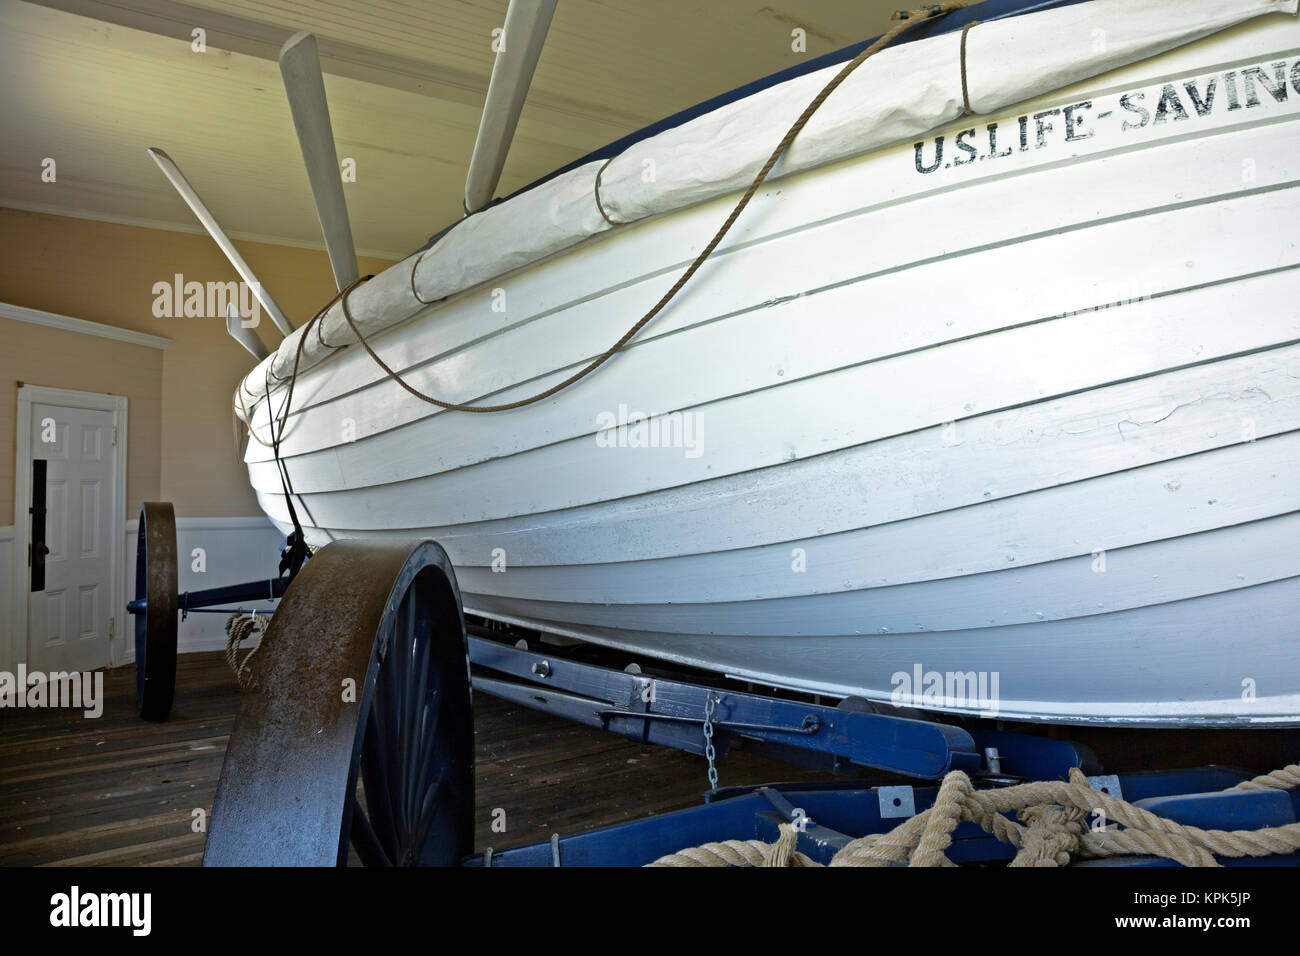 NC01086-00...NORTH CAROLINA - Surf boat on cart in the boathouse of the former Life Saving Station at the historical visllage of Portsmouth on Portsmo Stock Photo